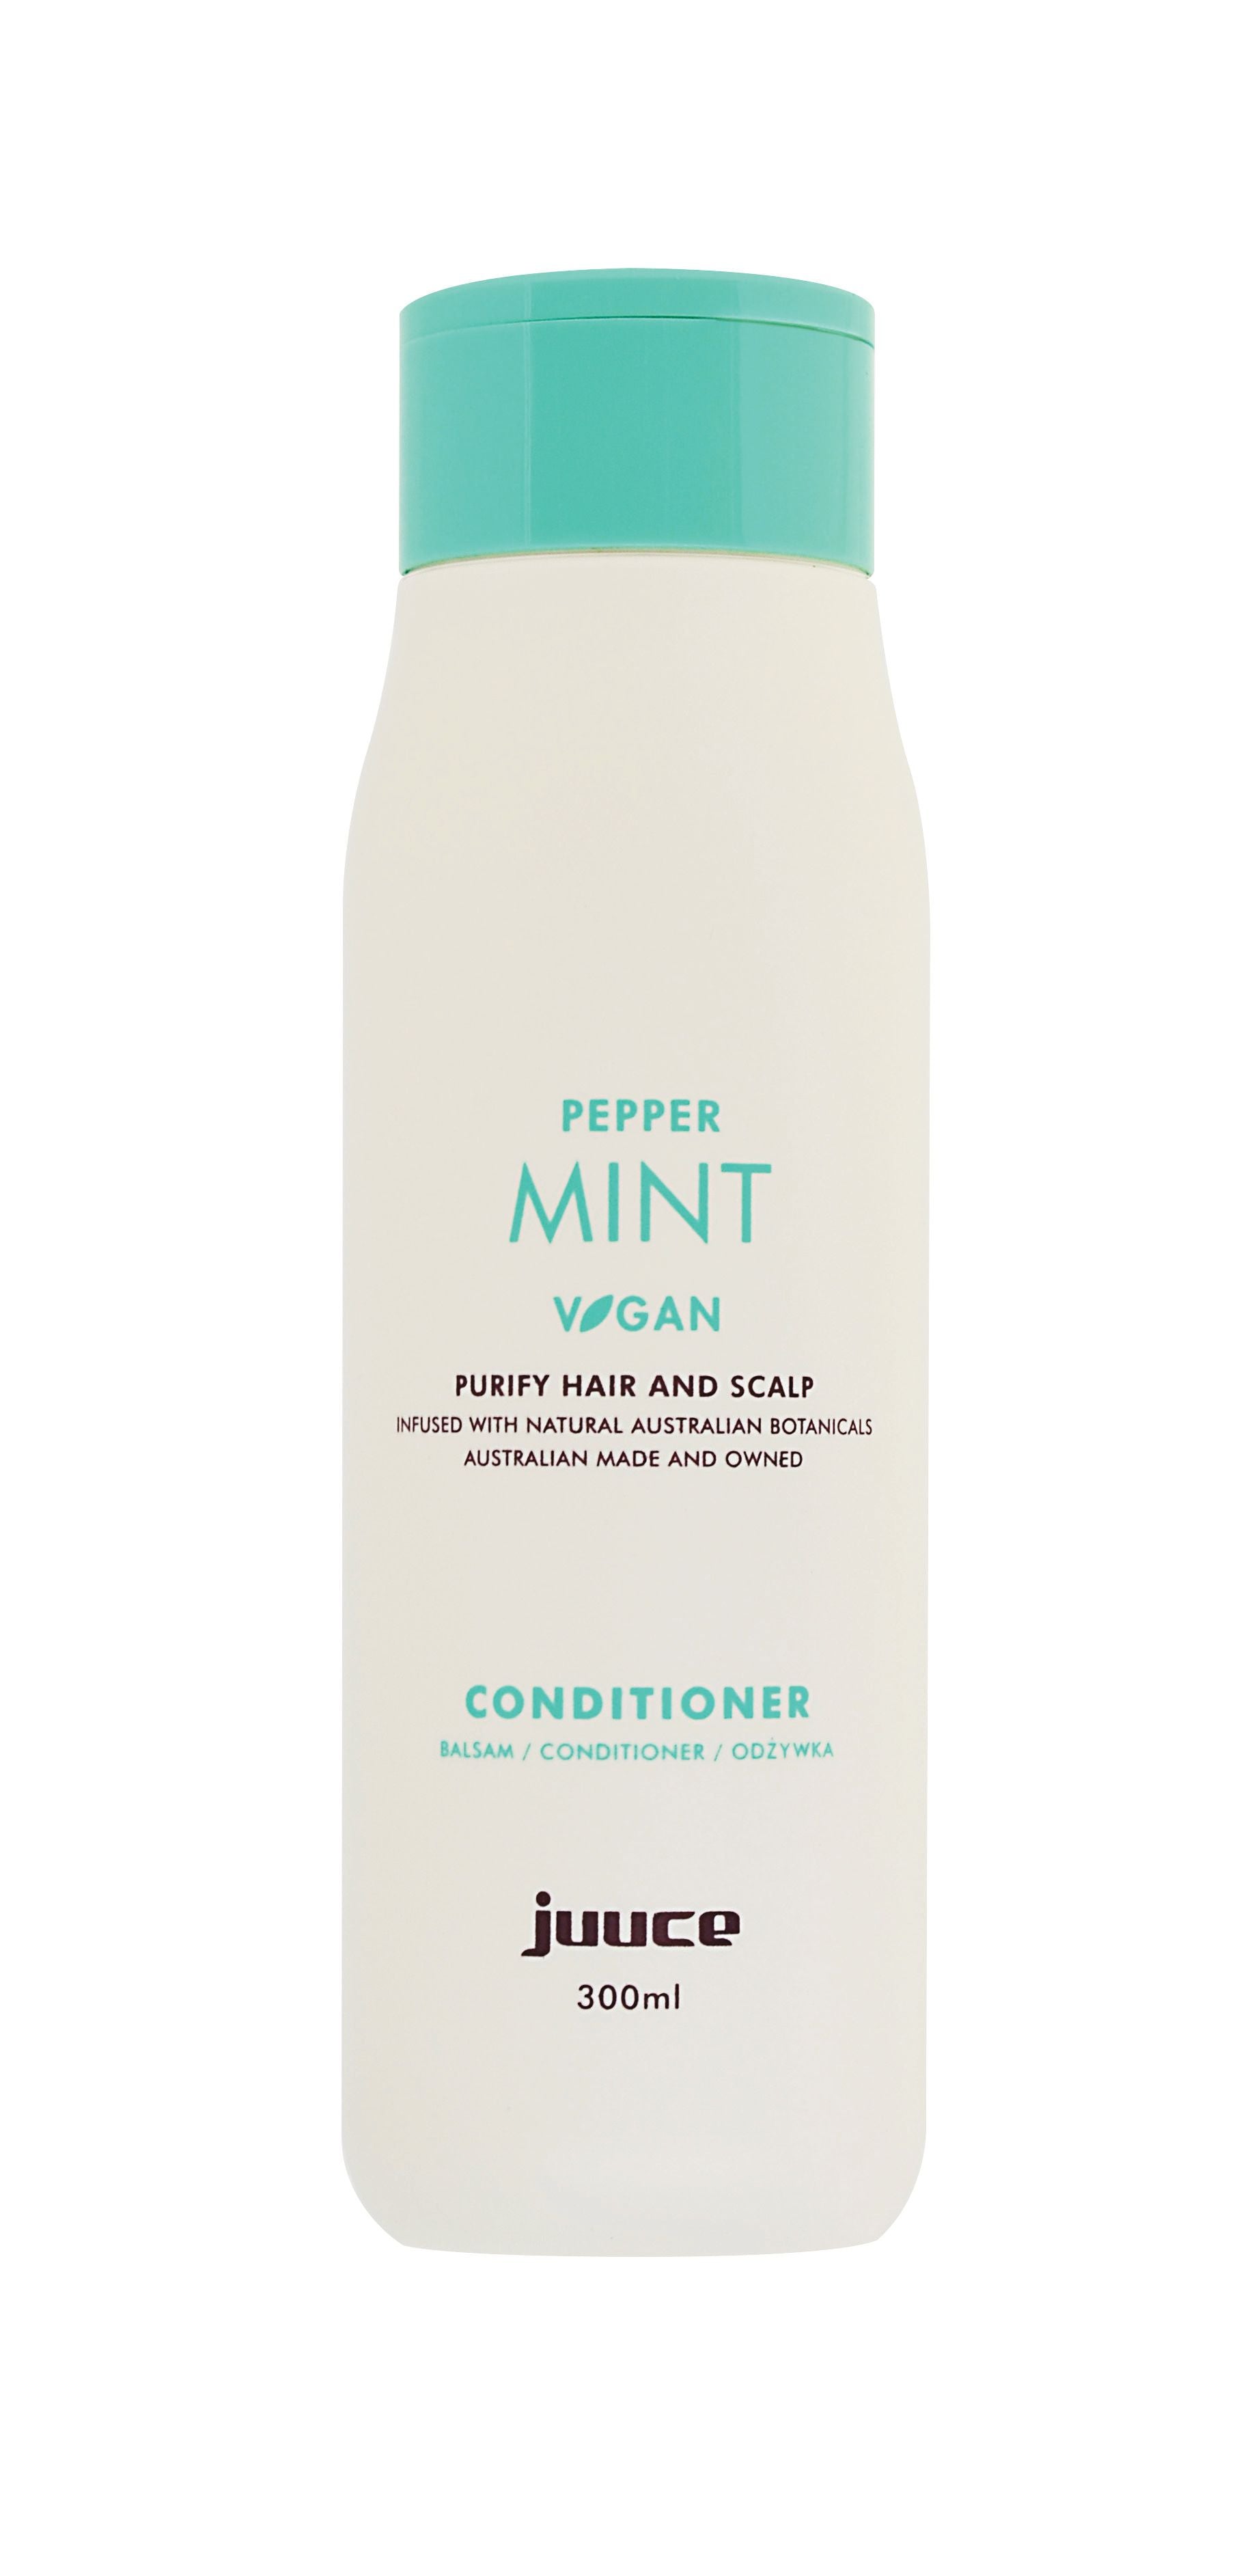 Juuce Peppermint Conditioner 300ml Juuce Peppermint - On Line Hair Depot